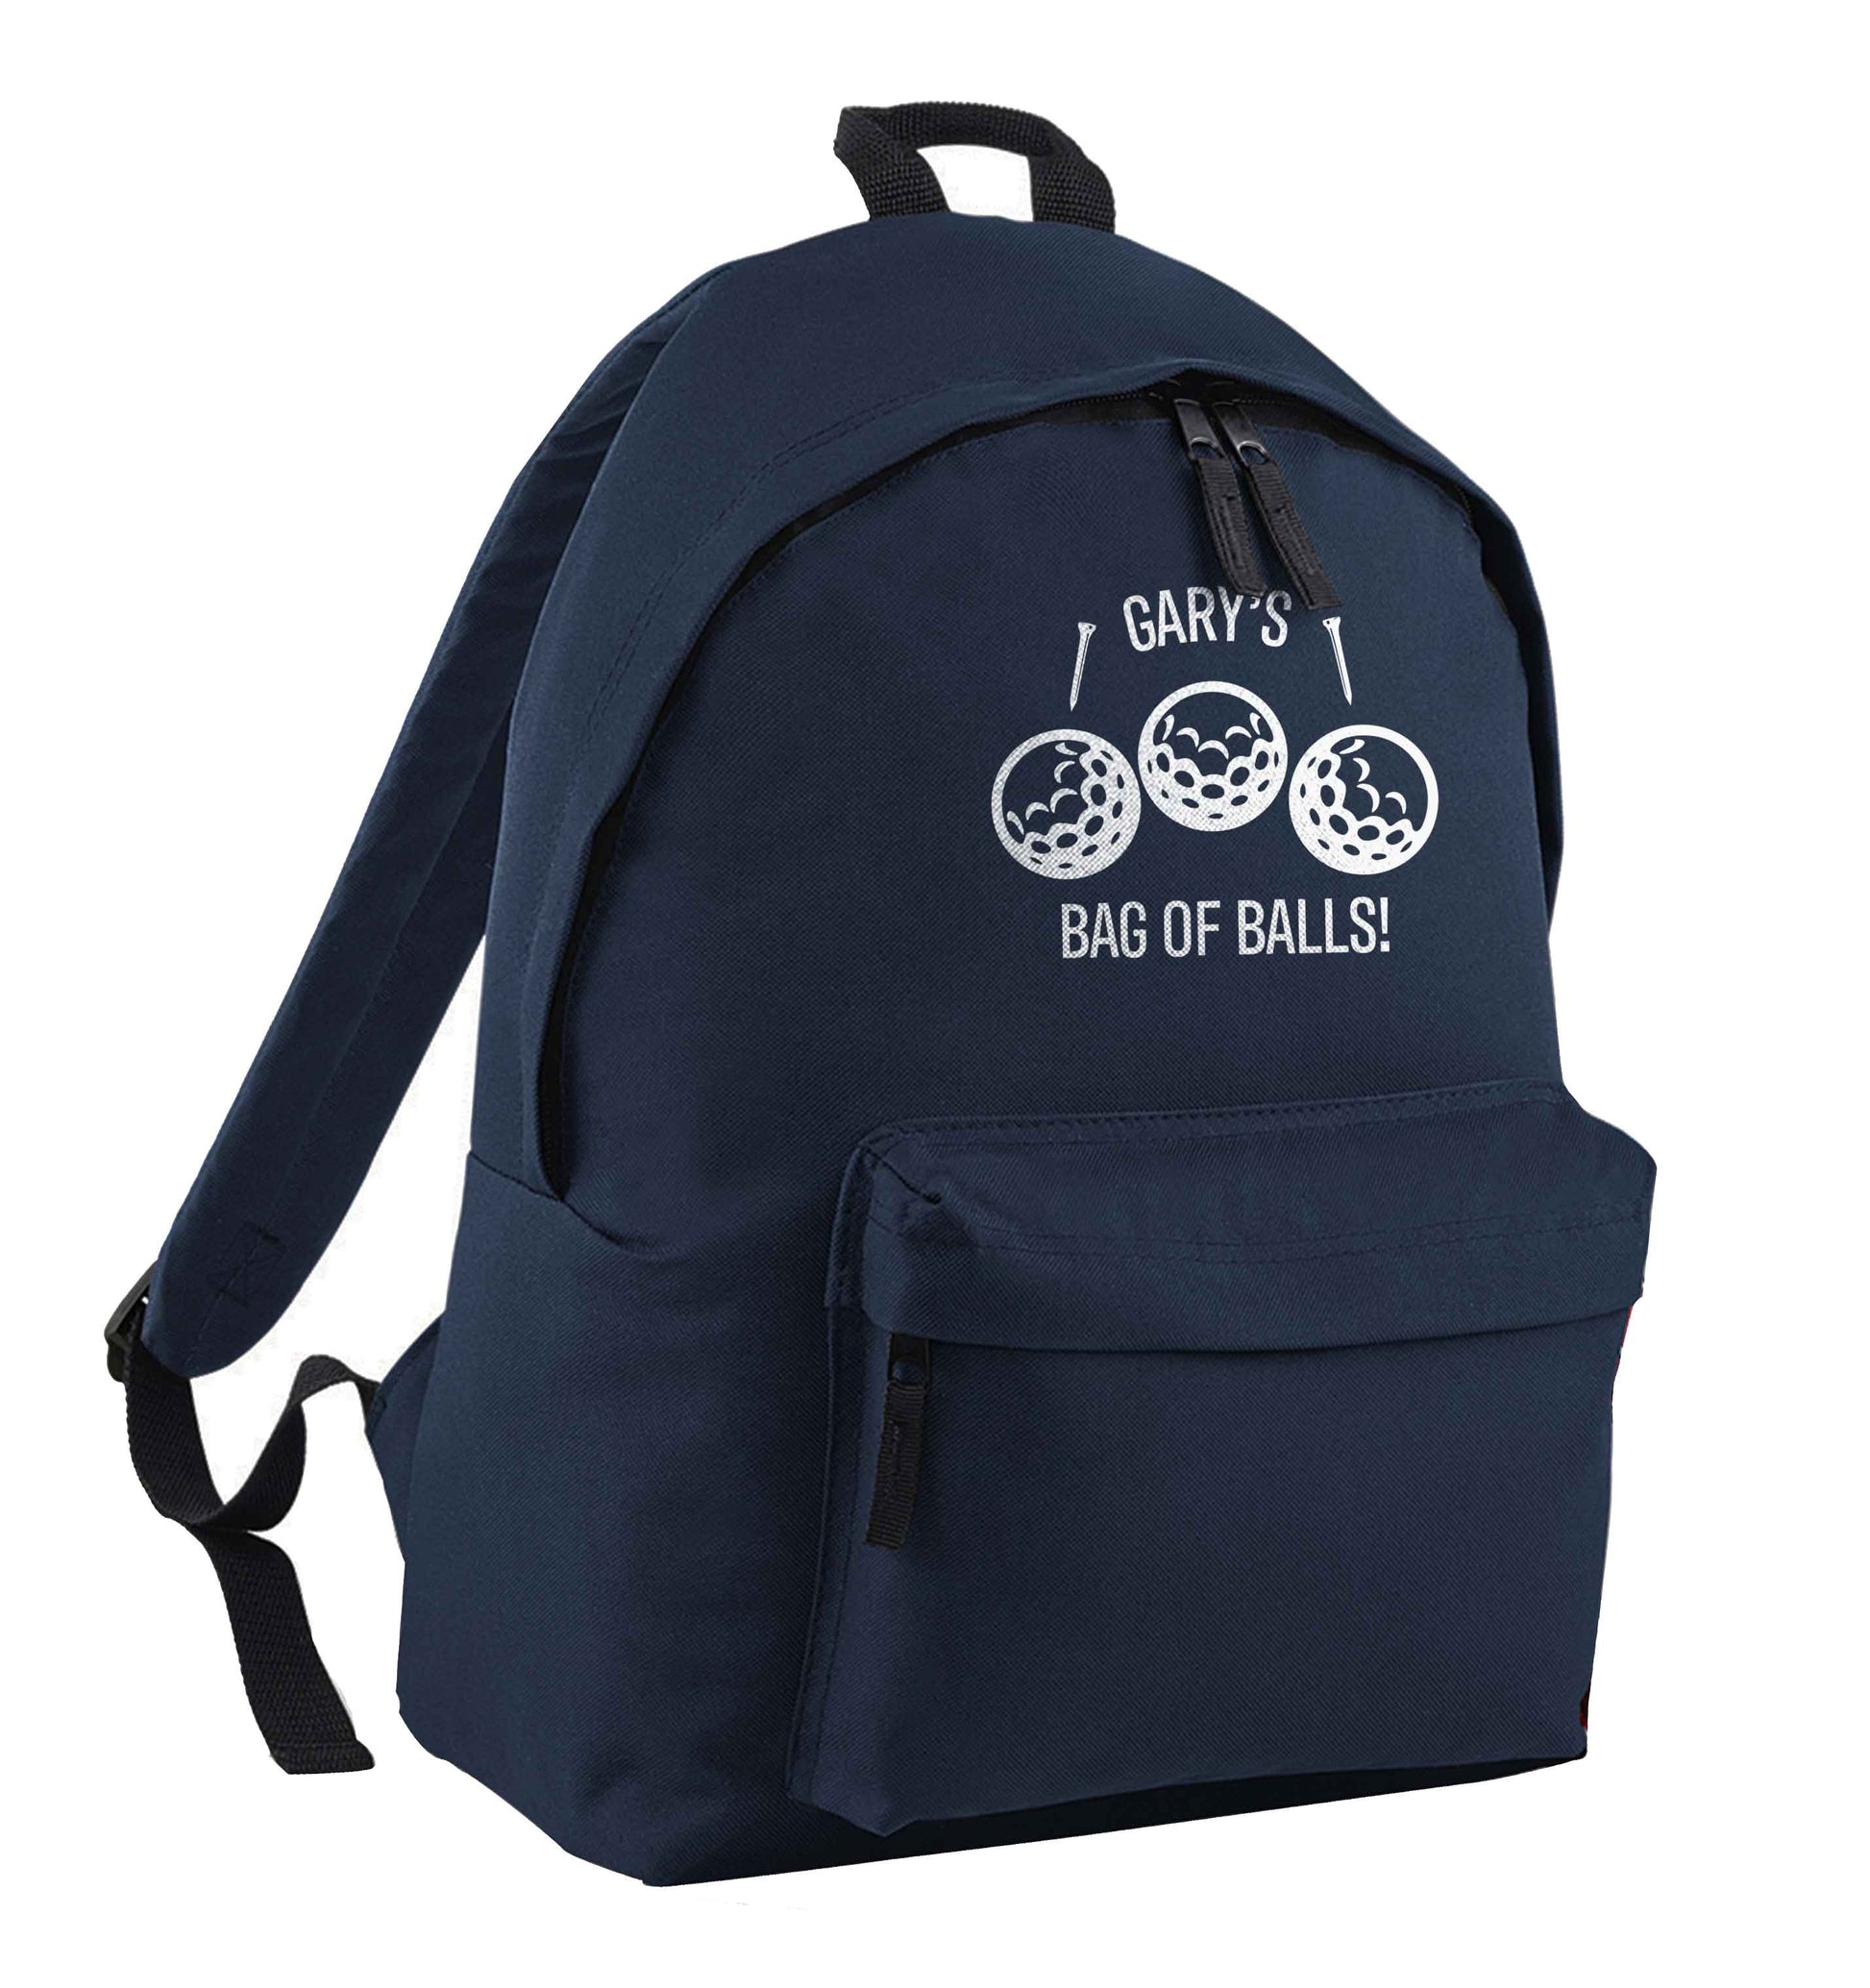 Personalised bag of golf balls navy adults backpack